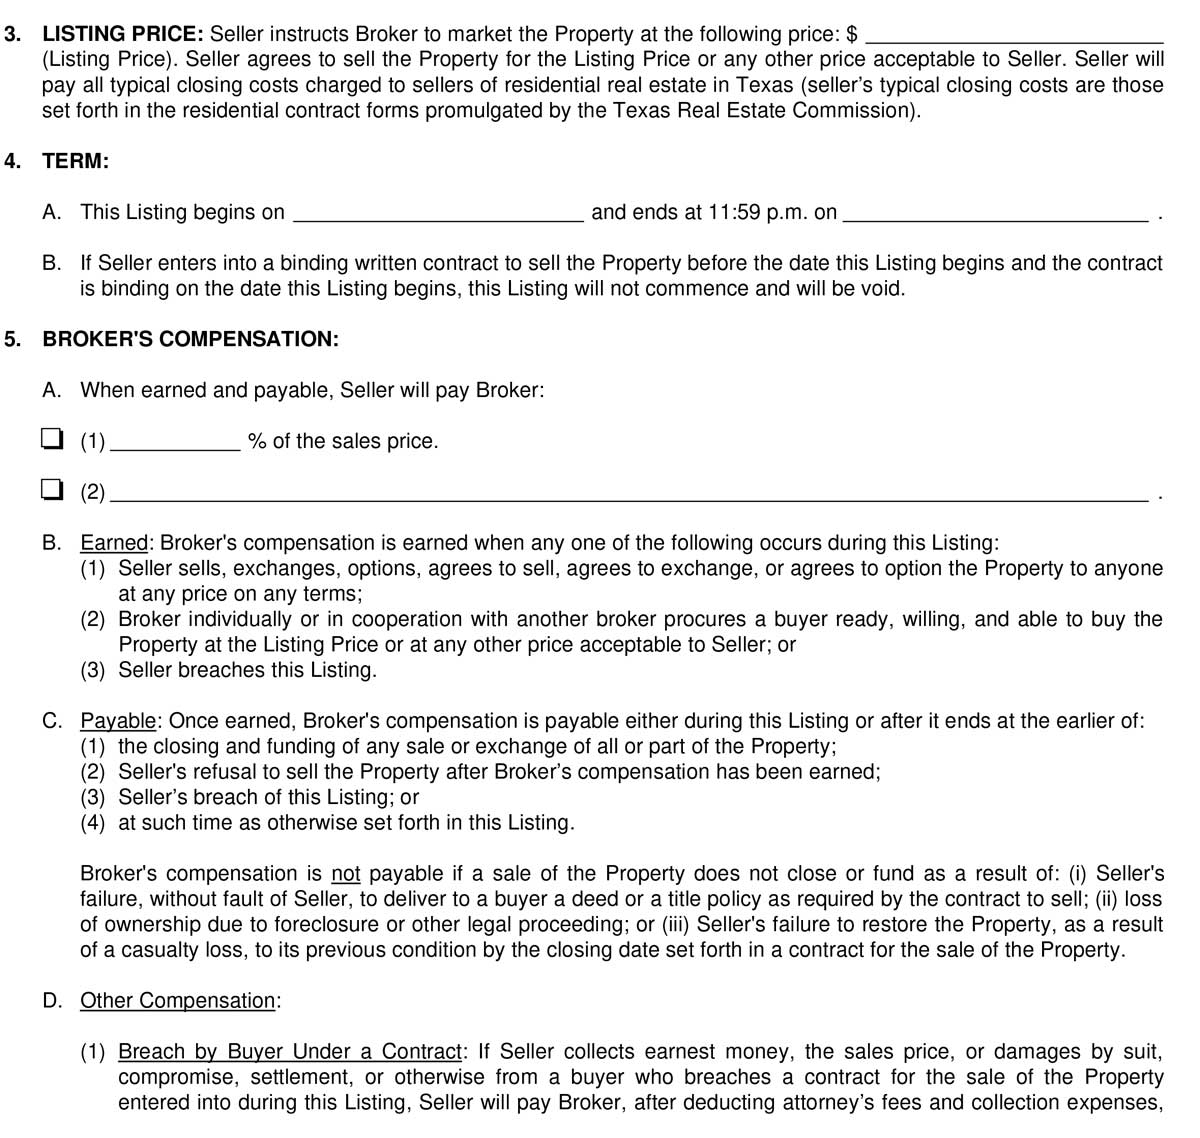 Mortgage Broker Fee Agreement The Listing Agreement Para 3 4 And 5 Listing Price Term And